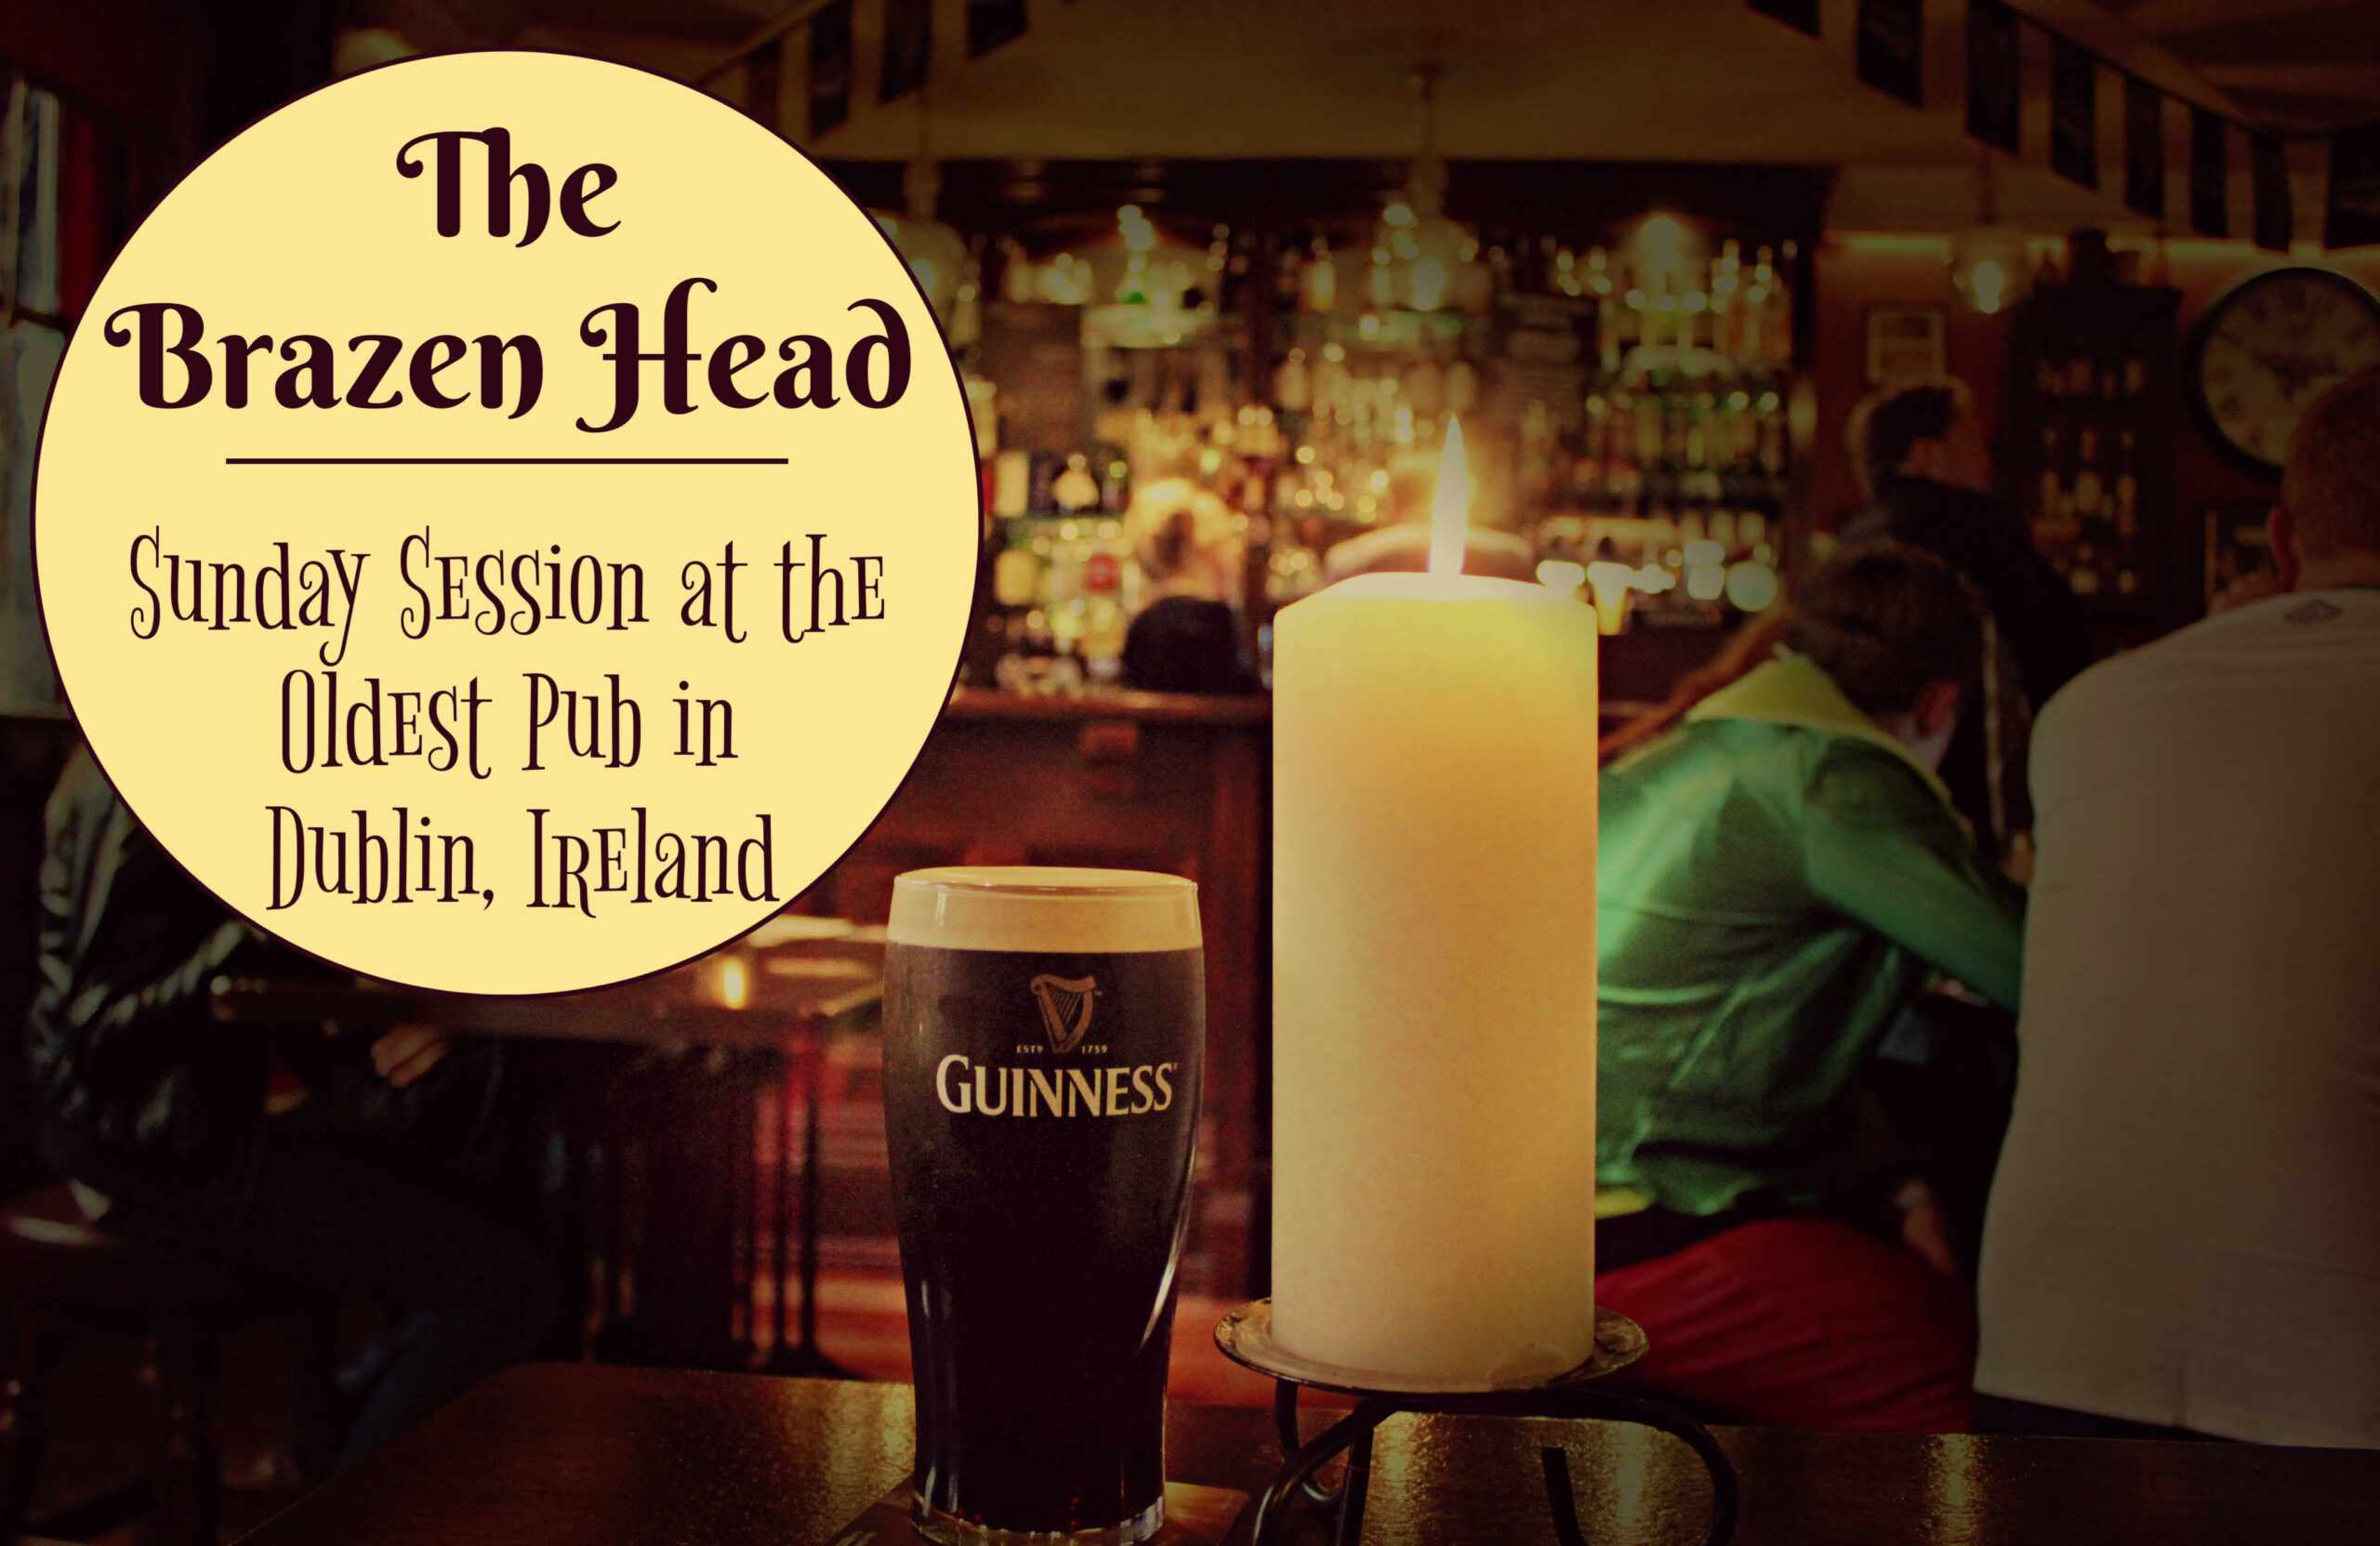 The Brazen Head Sunday Session At The Oldest Pub In